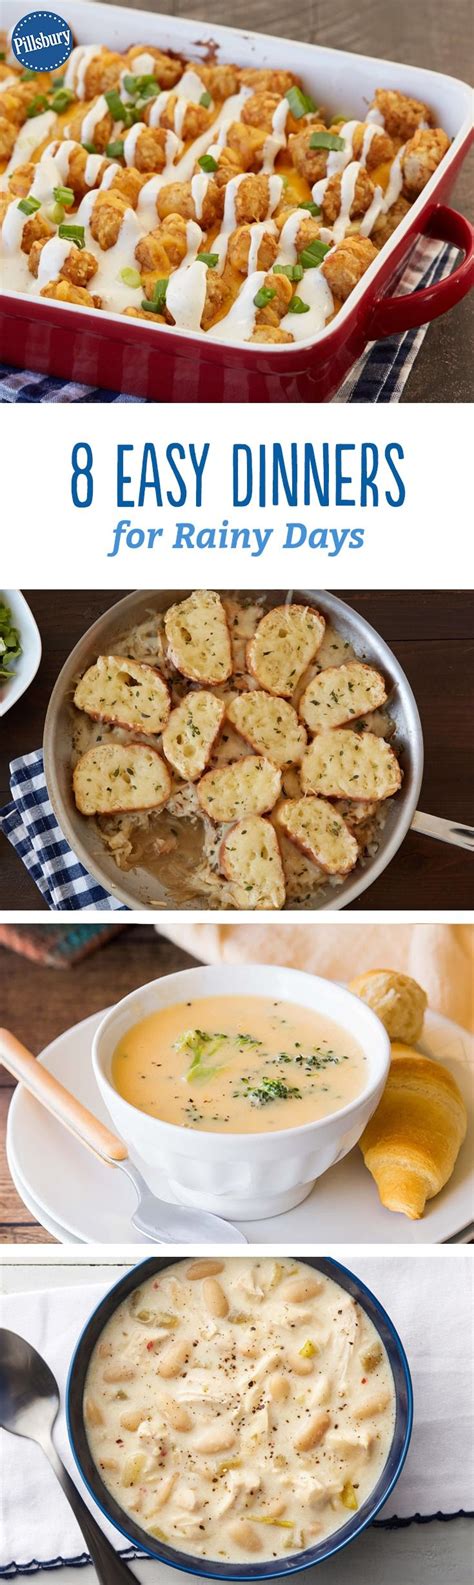 Save These 10 Easy Dinners for a Rainy Day in 2020 | Cheap ...